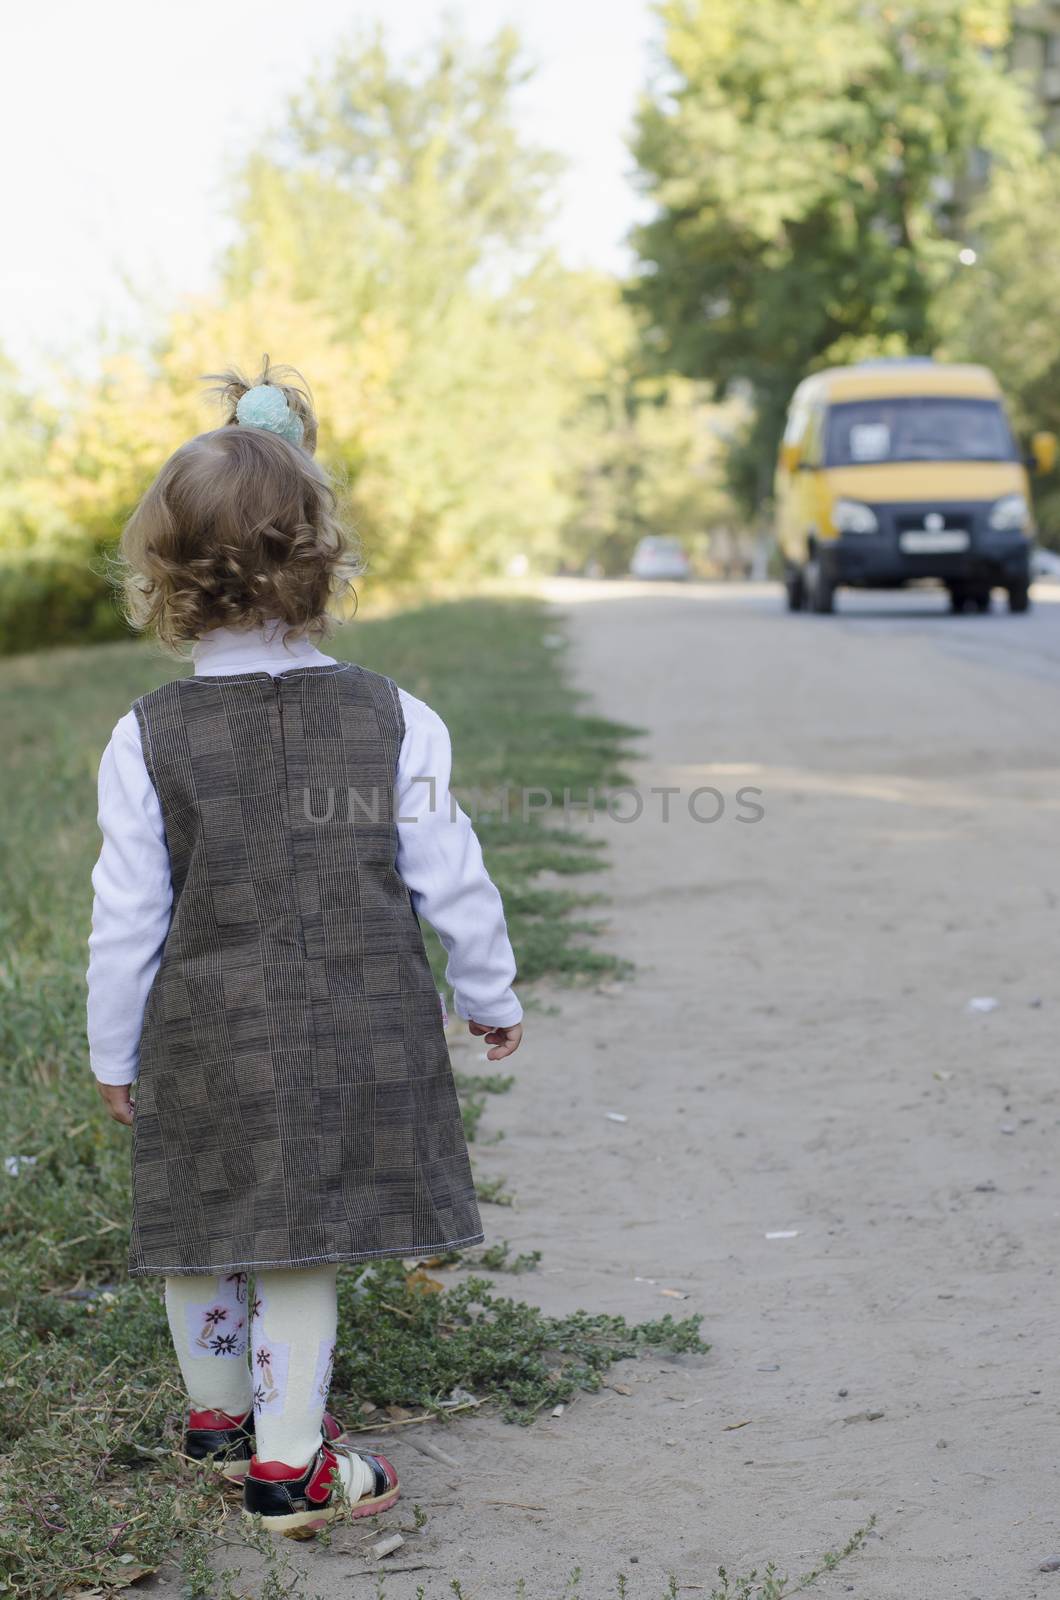 The little girl standing at the edge of the road waits for the arrival of the bus.